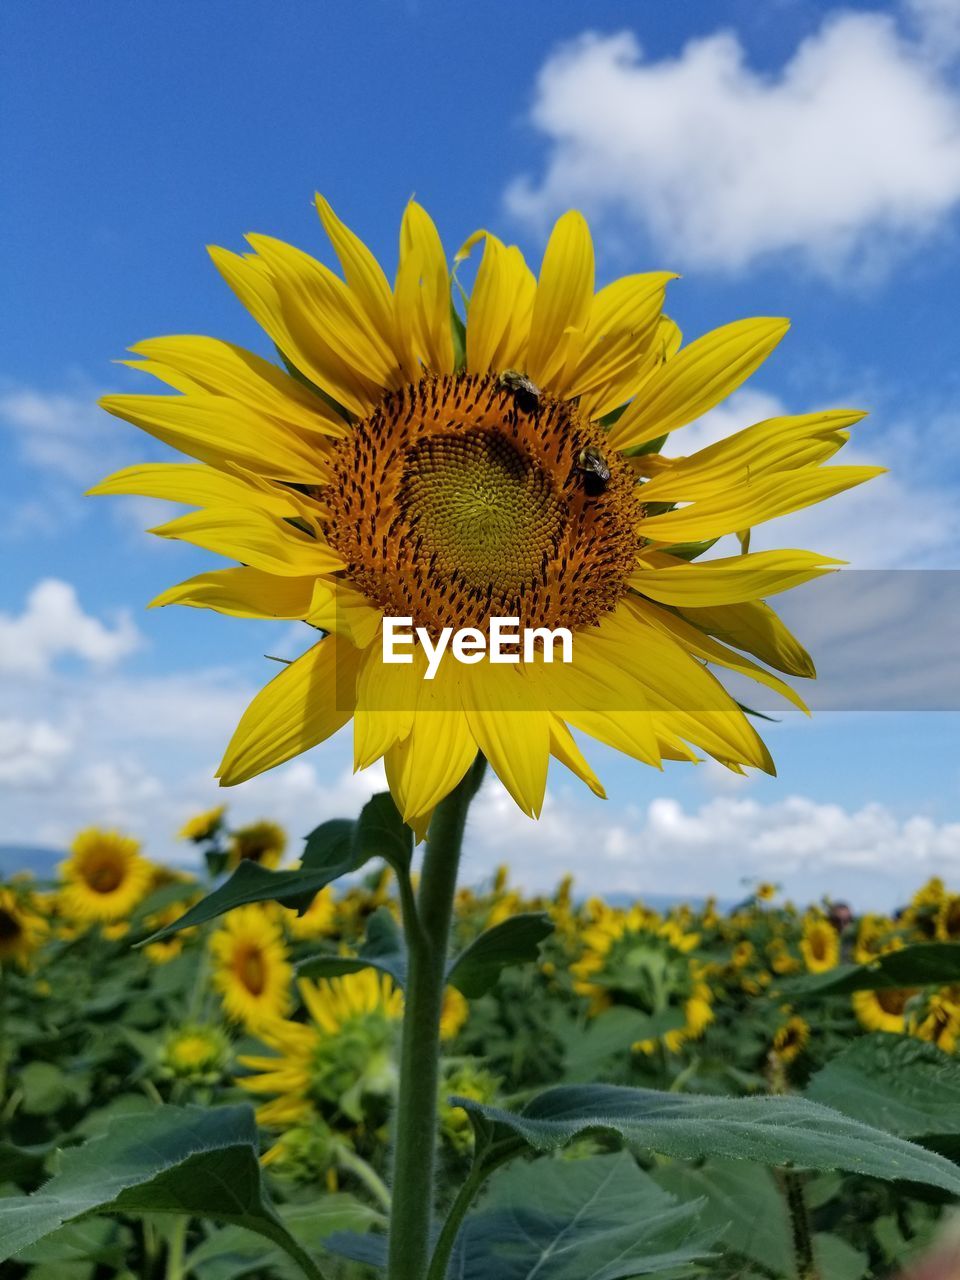 Sunflowers on a bright summer day